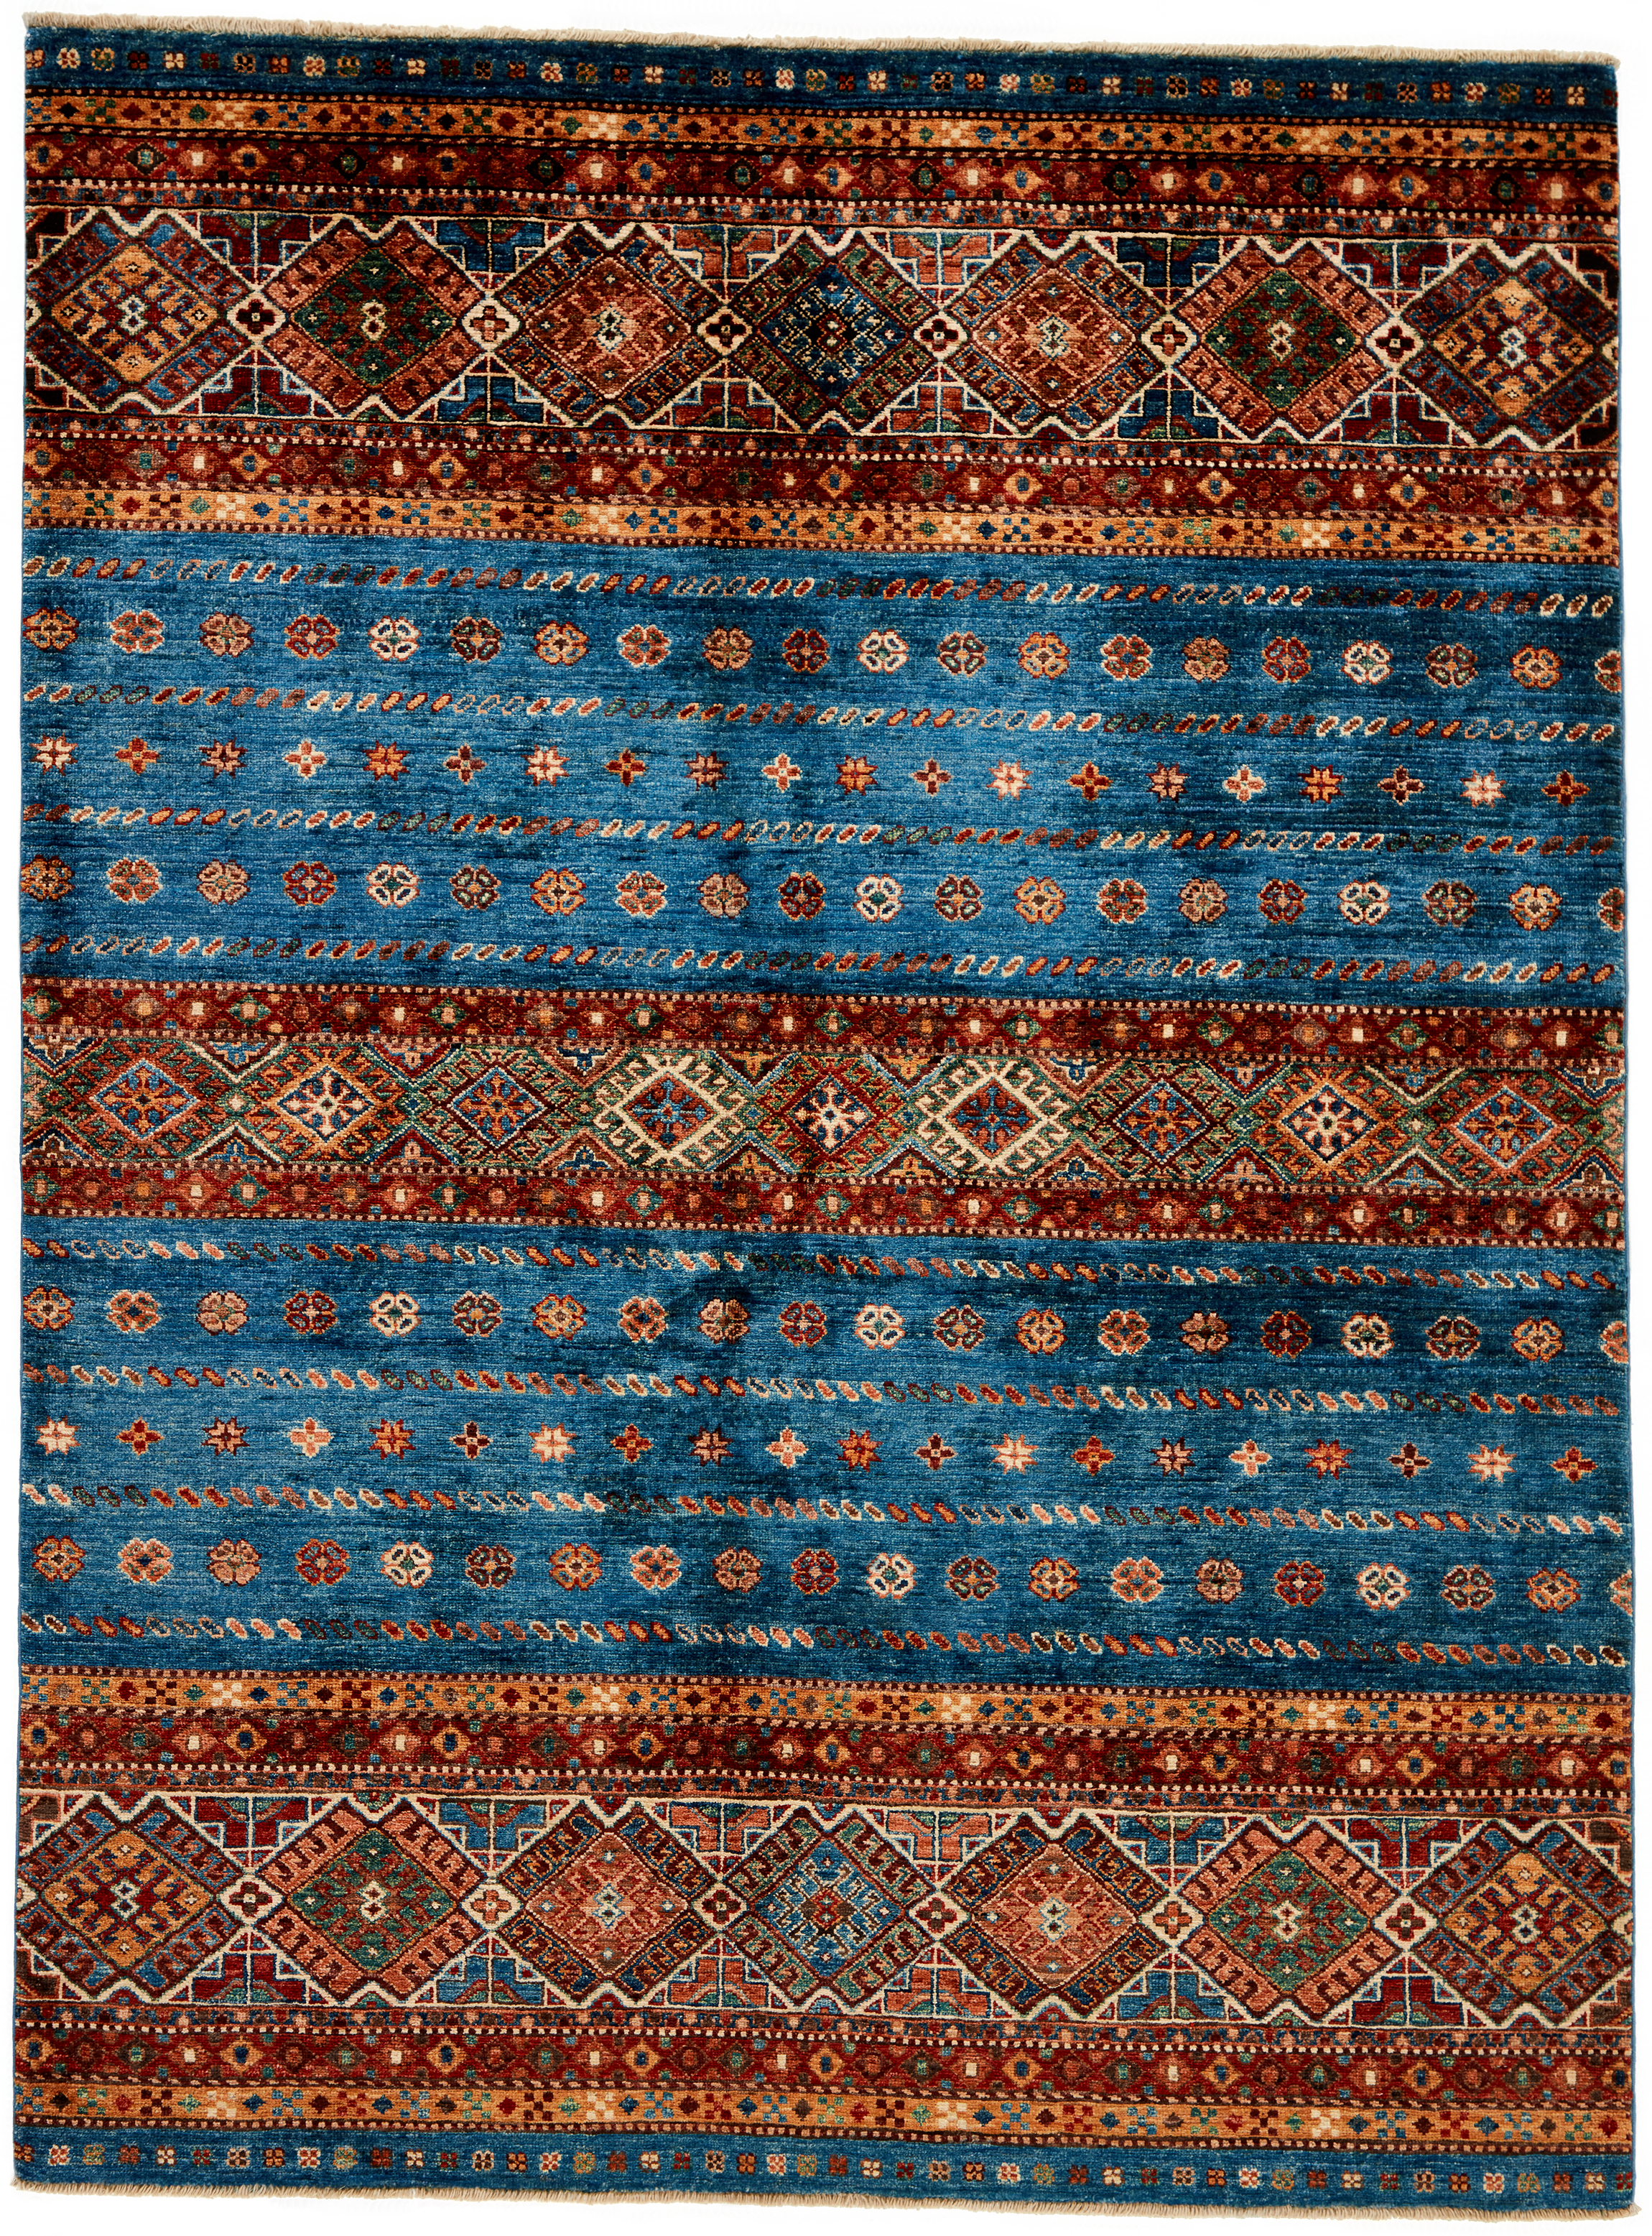 Authentic oriental rug with traditional tile pattern in red, pink, orange, yellow, blue, green, beige and brown